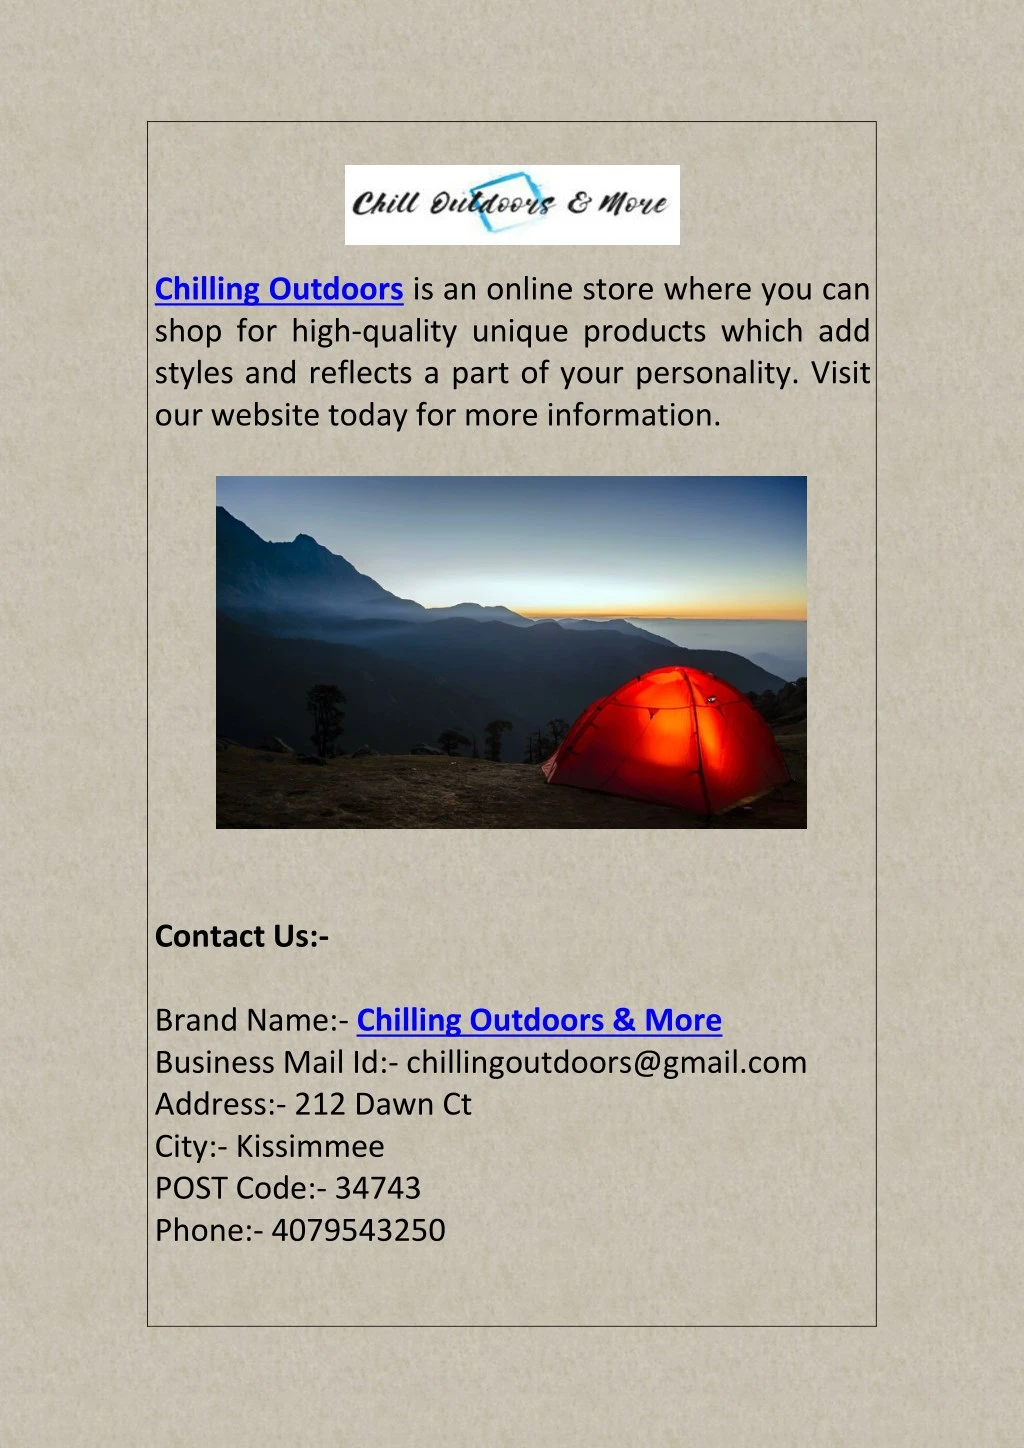 chilling outdoors is an online store where